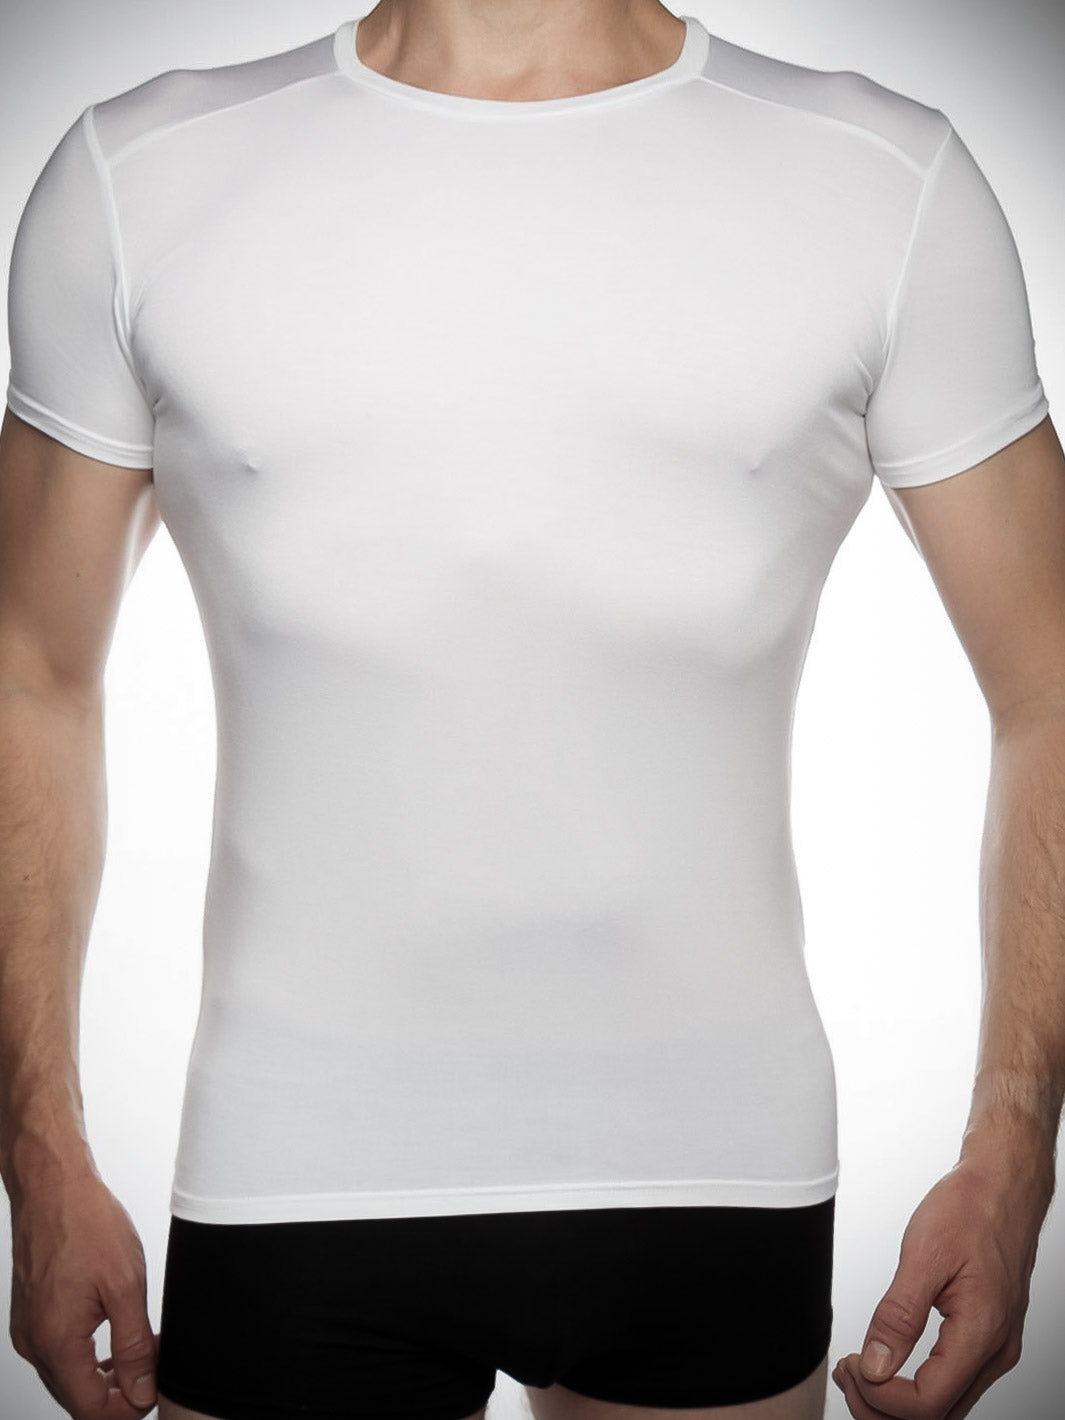 Men's undershirt with crew neck in white bamboo - front view